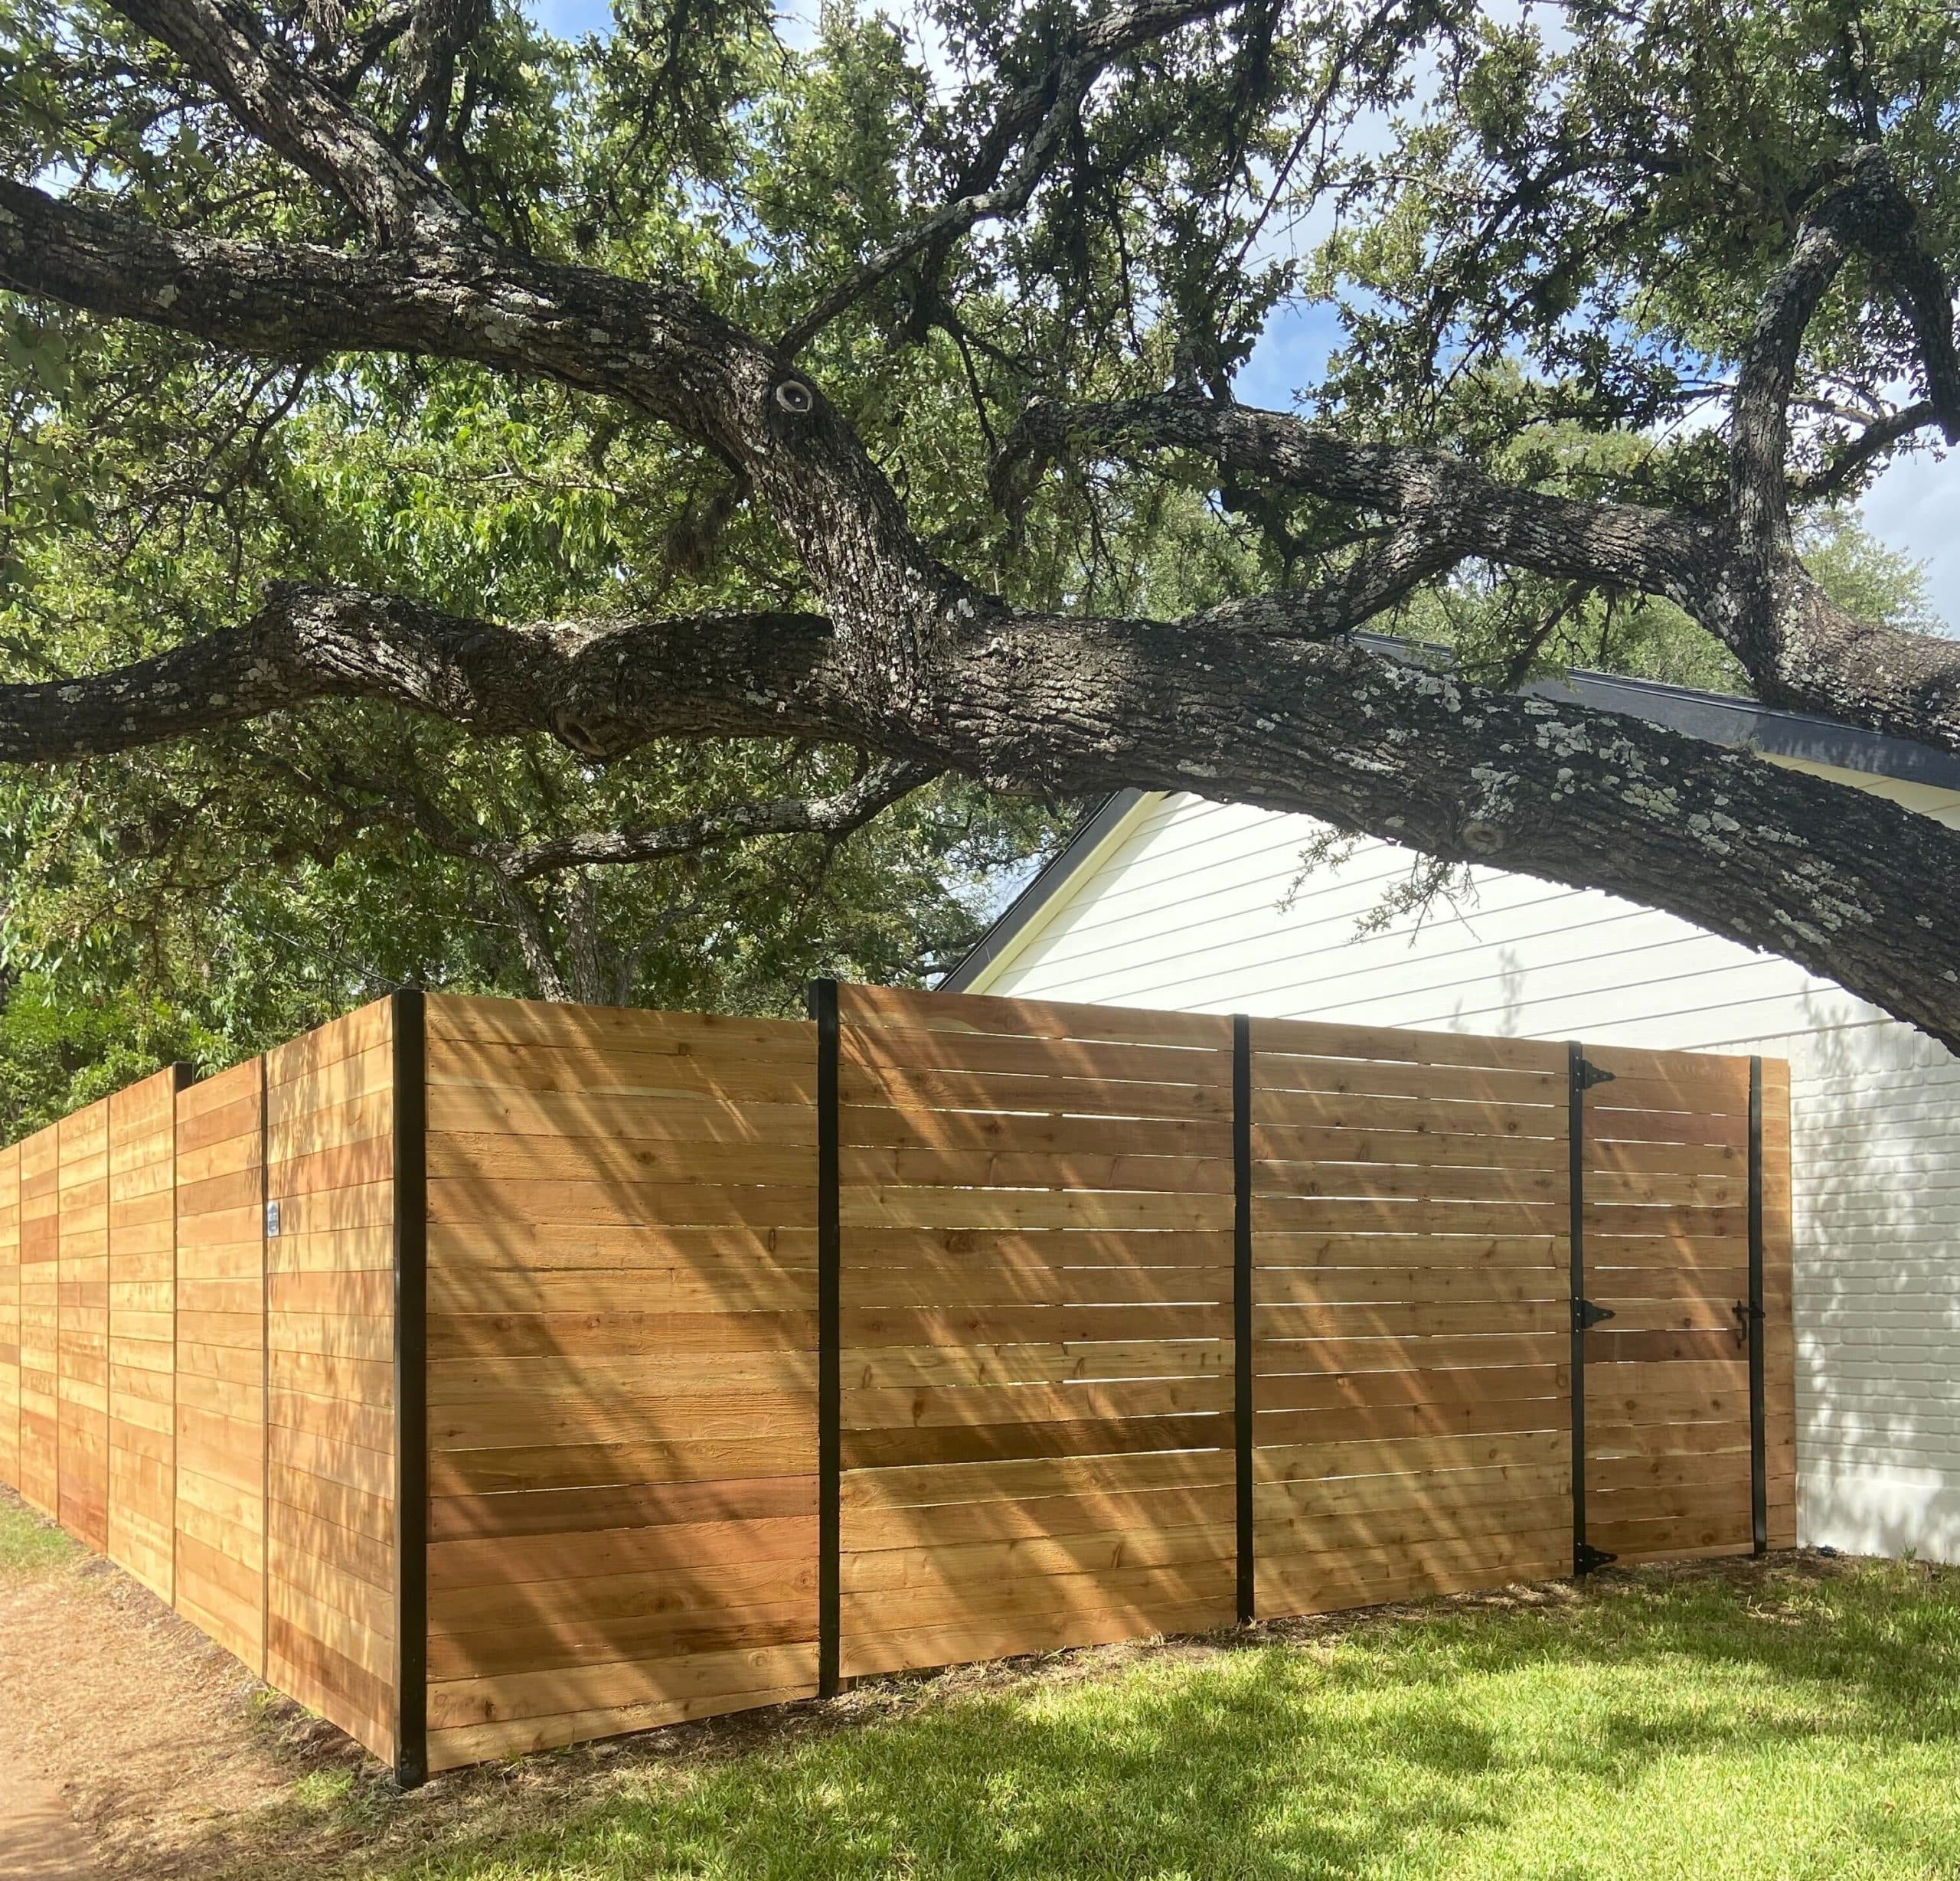 15 Types of Wood Fences That Look Great and Provide Privacy